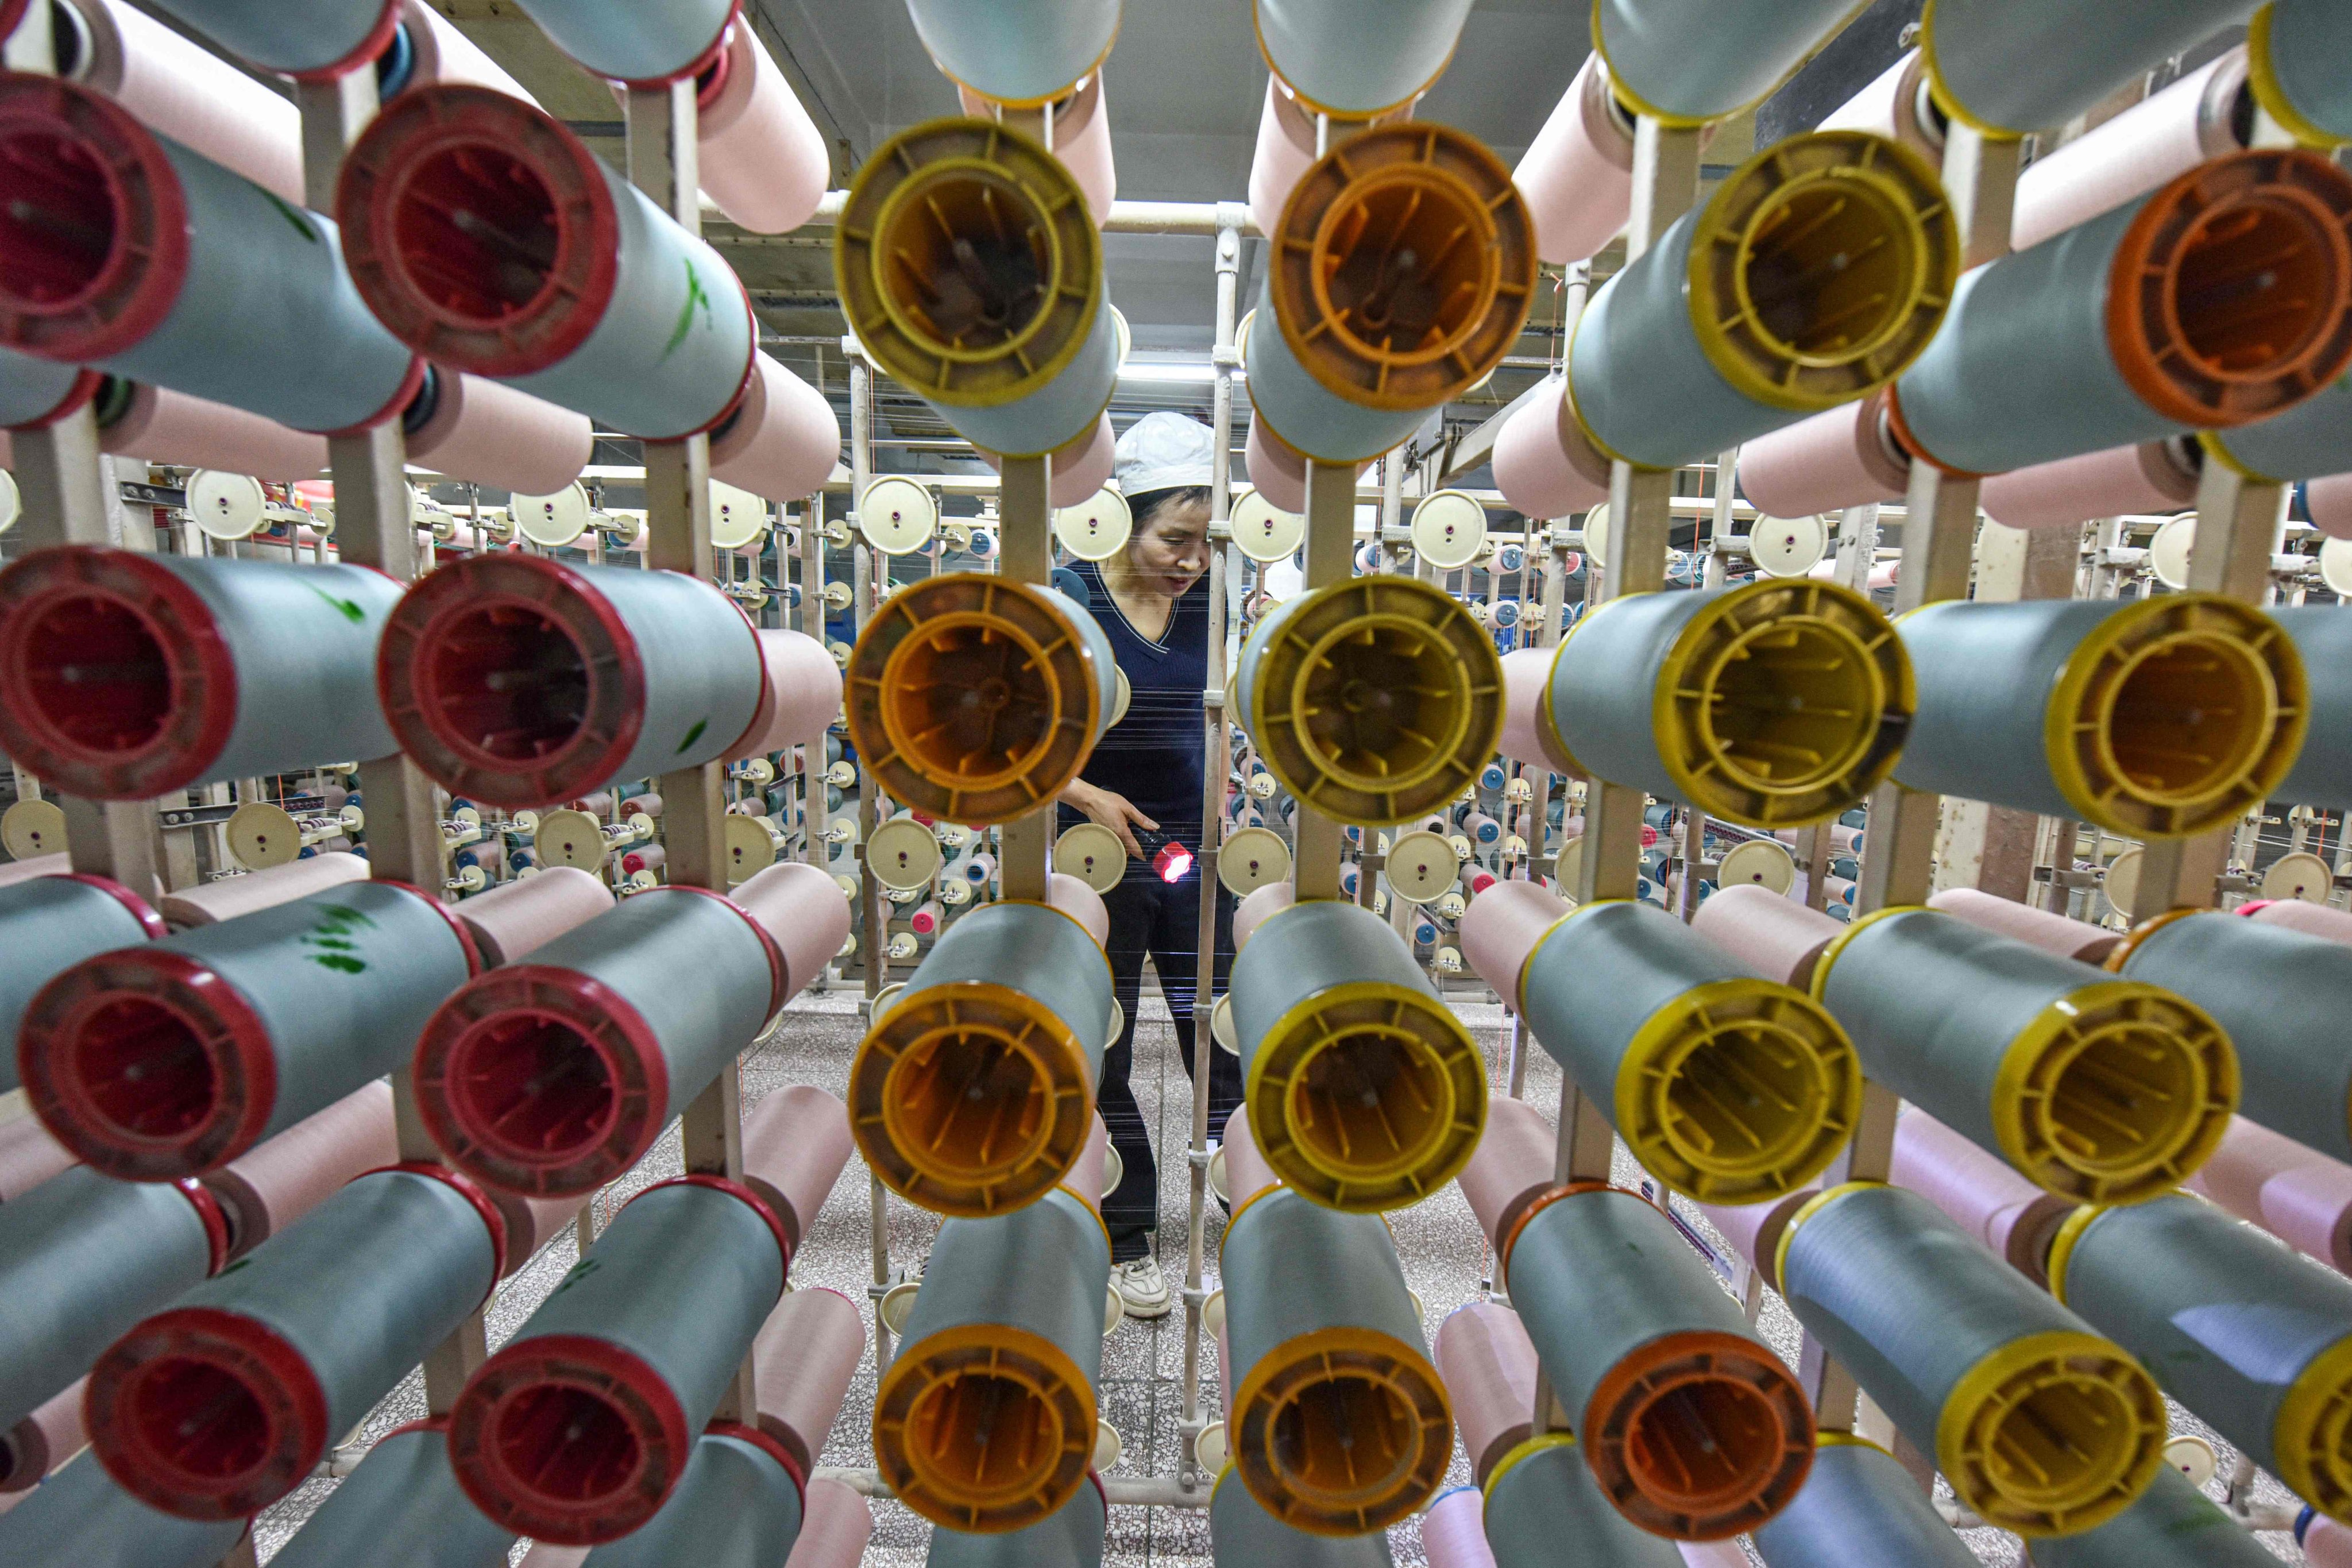 A worker produces silk products at a textile factory in Anhui province on Tuesday, when some analysts shared concerns that China’s economic recovery may rely too heavily on manufacturing. Photo: AFP